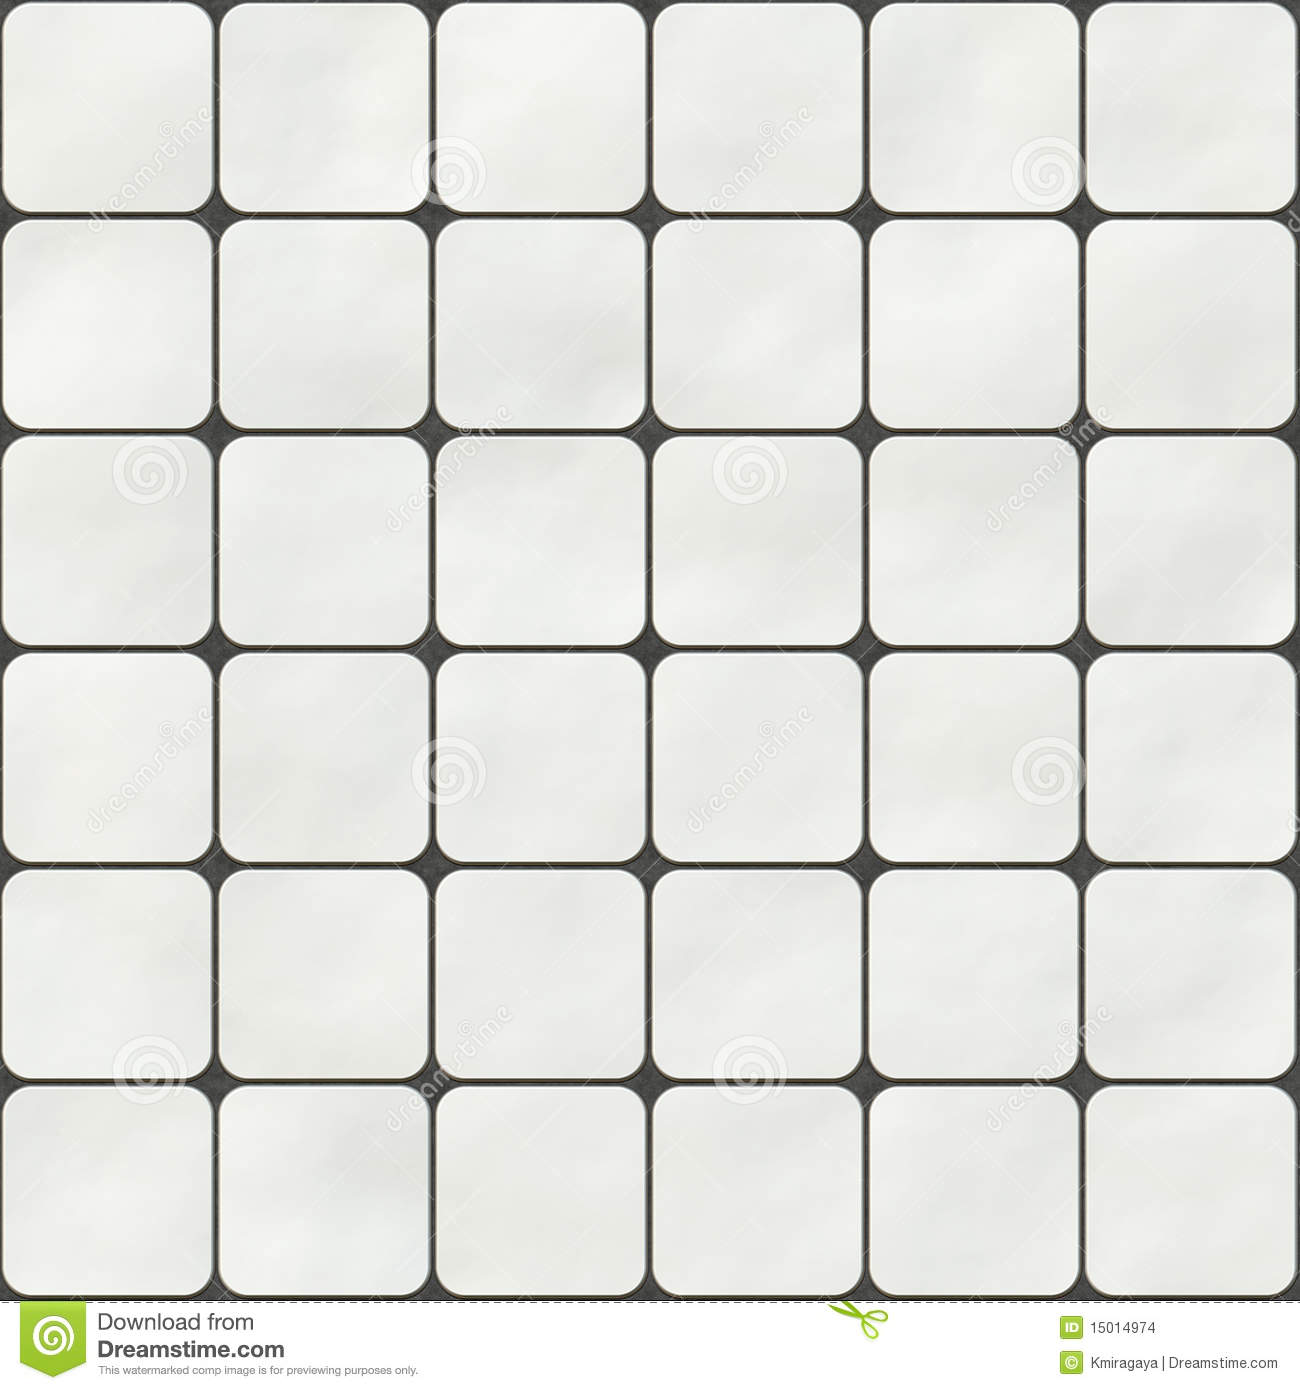 Seamless Texture Made Of White Square Tiles Stock Images   Image